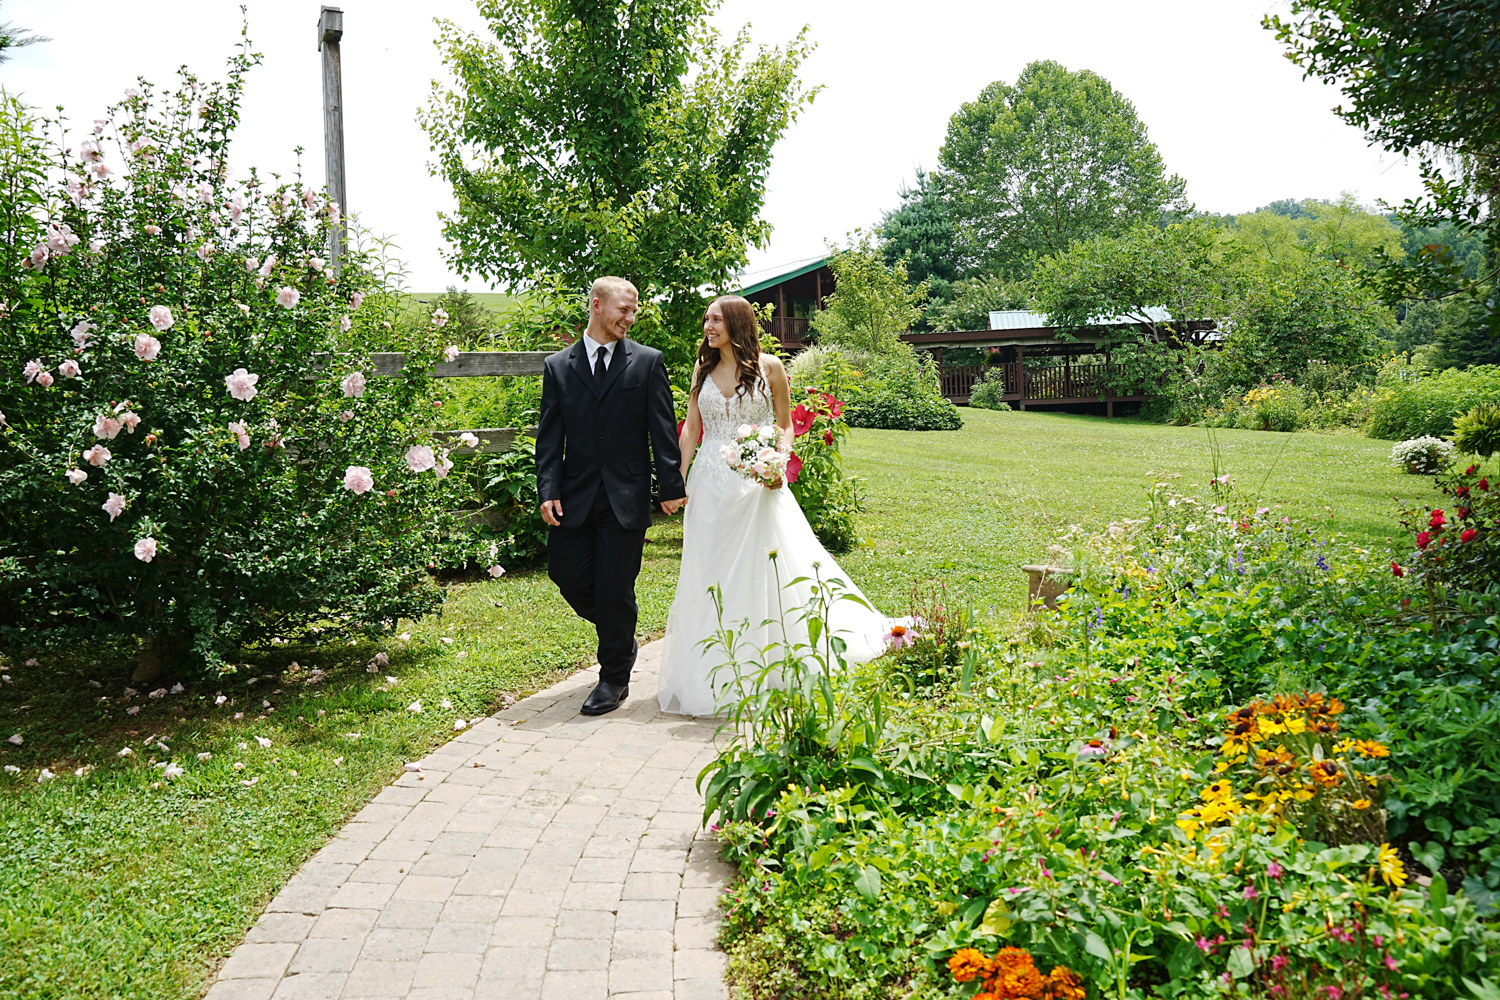 Couple walking down a brick path in a summer garden with a barn behind them on their wedding day